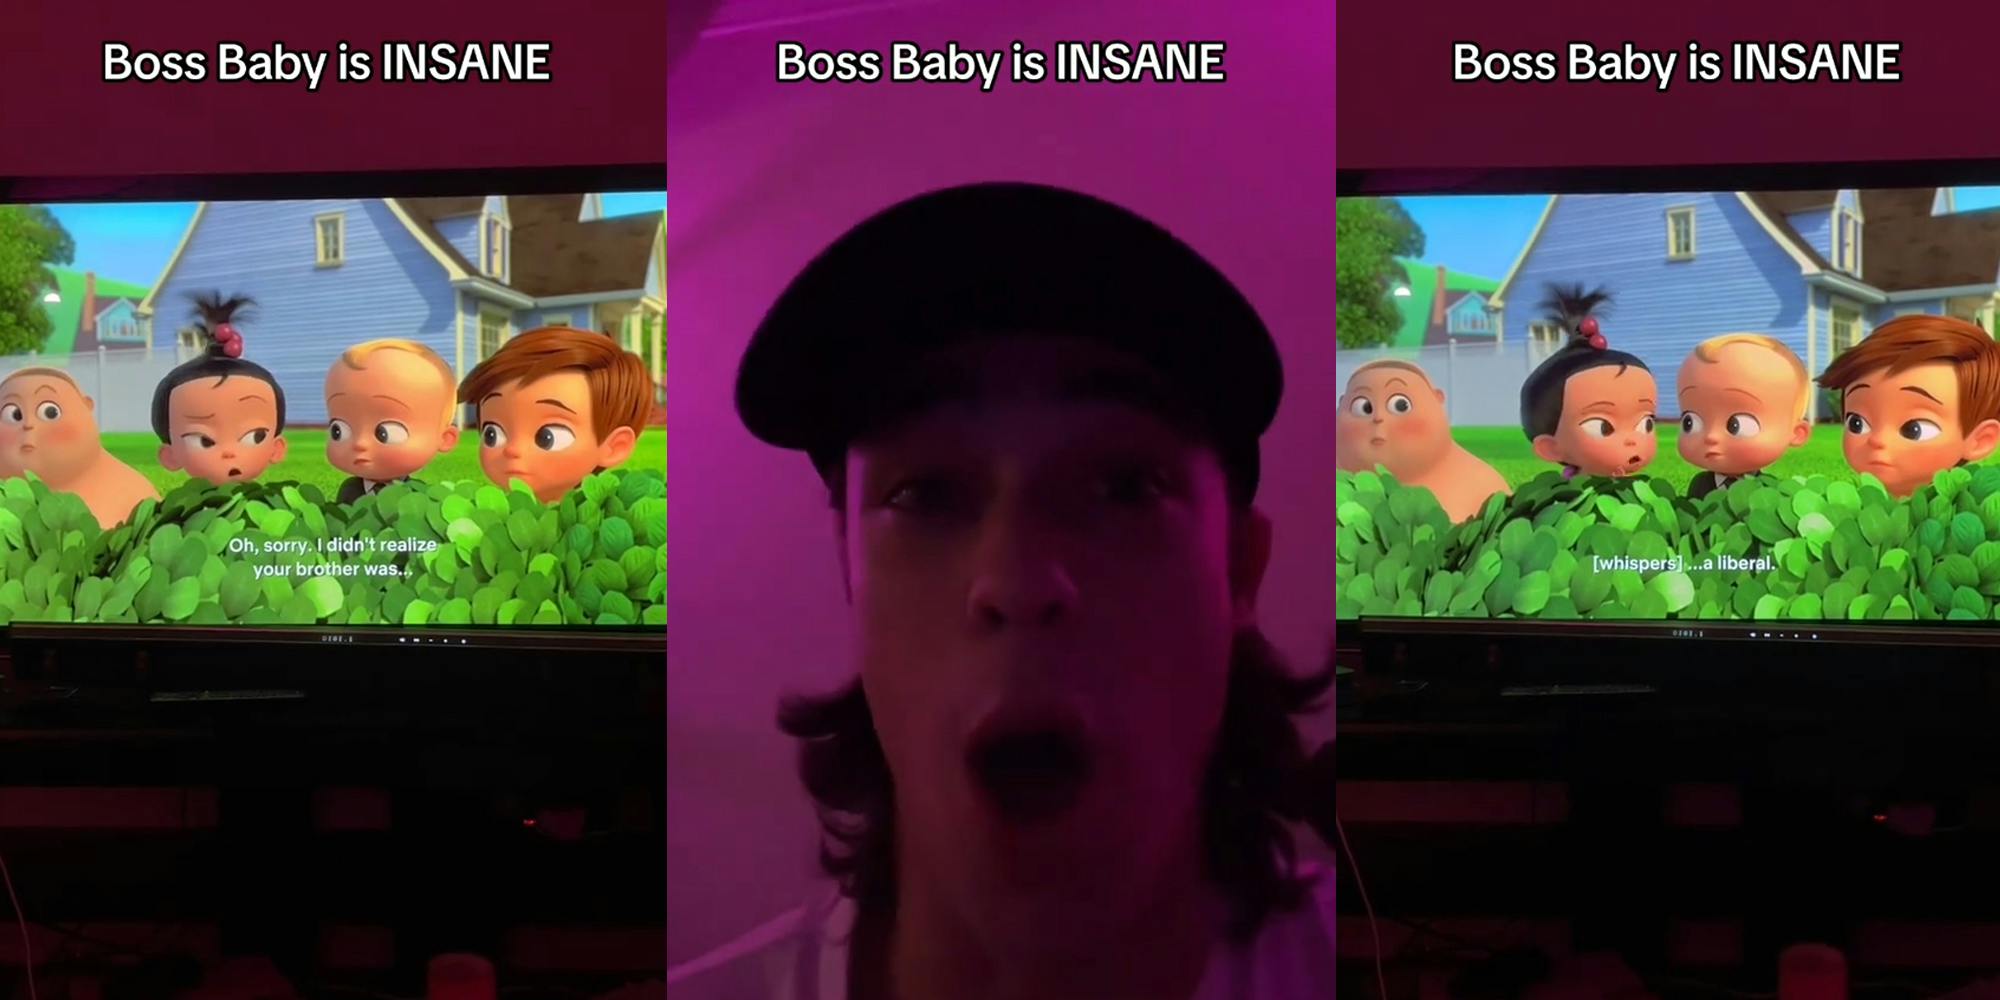 Boss Baby playing on tv with caption "Boss Baby is INSANE" (l) man speaking with caption "Boss Baby is INSANE" (c) Boss Baby playing on tv with caption "Boss Baby is INSANE" (r)